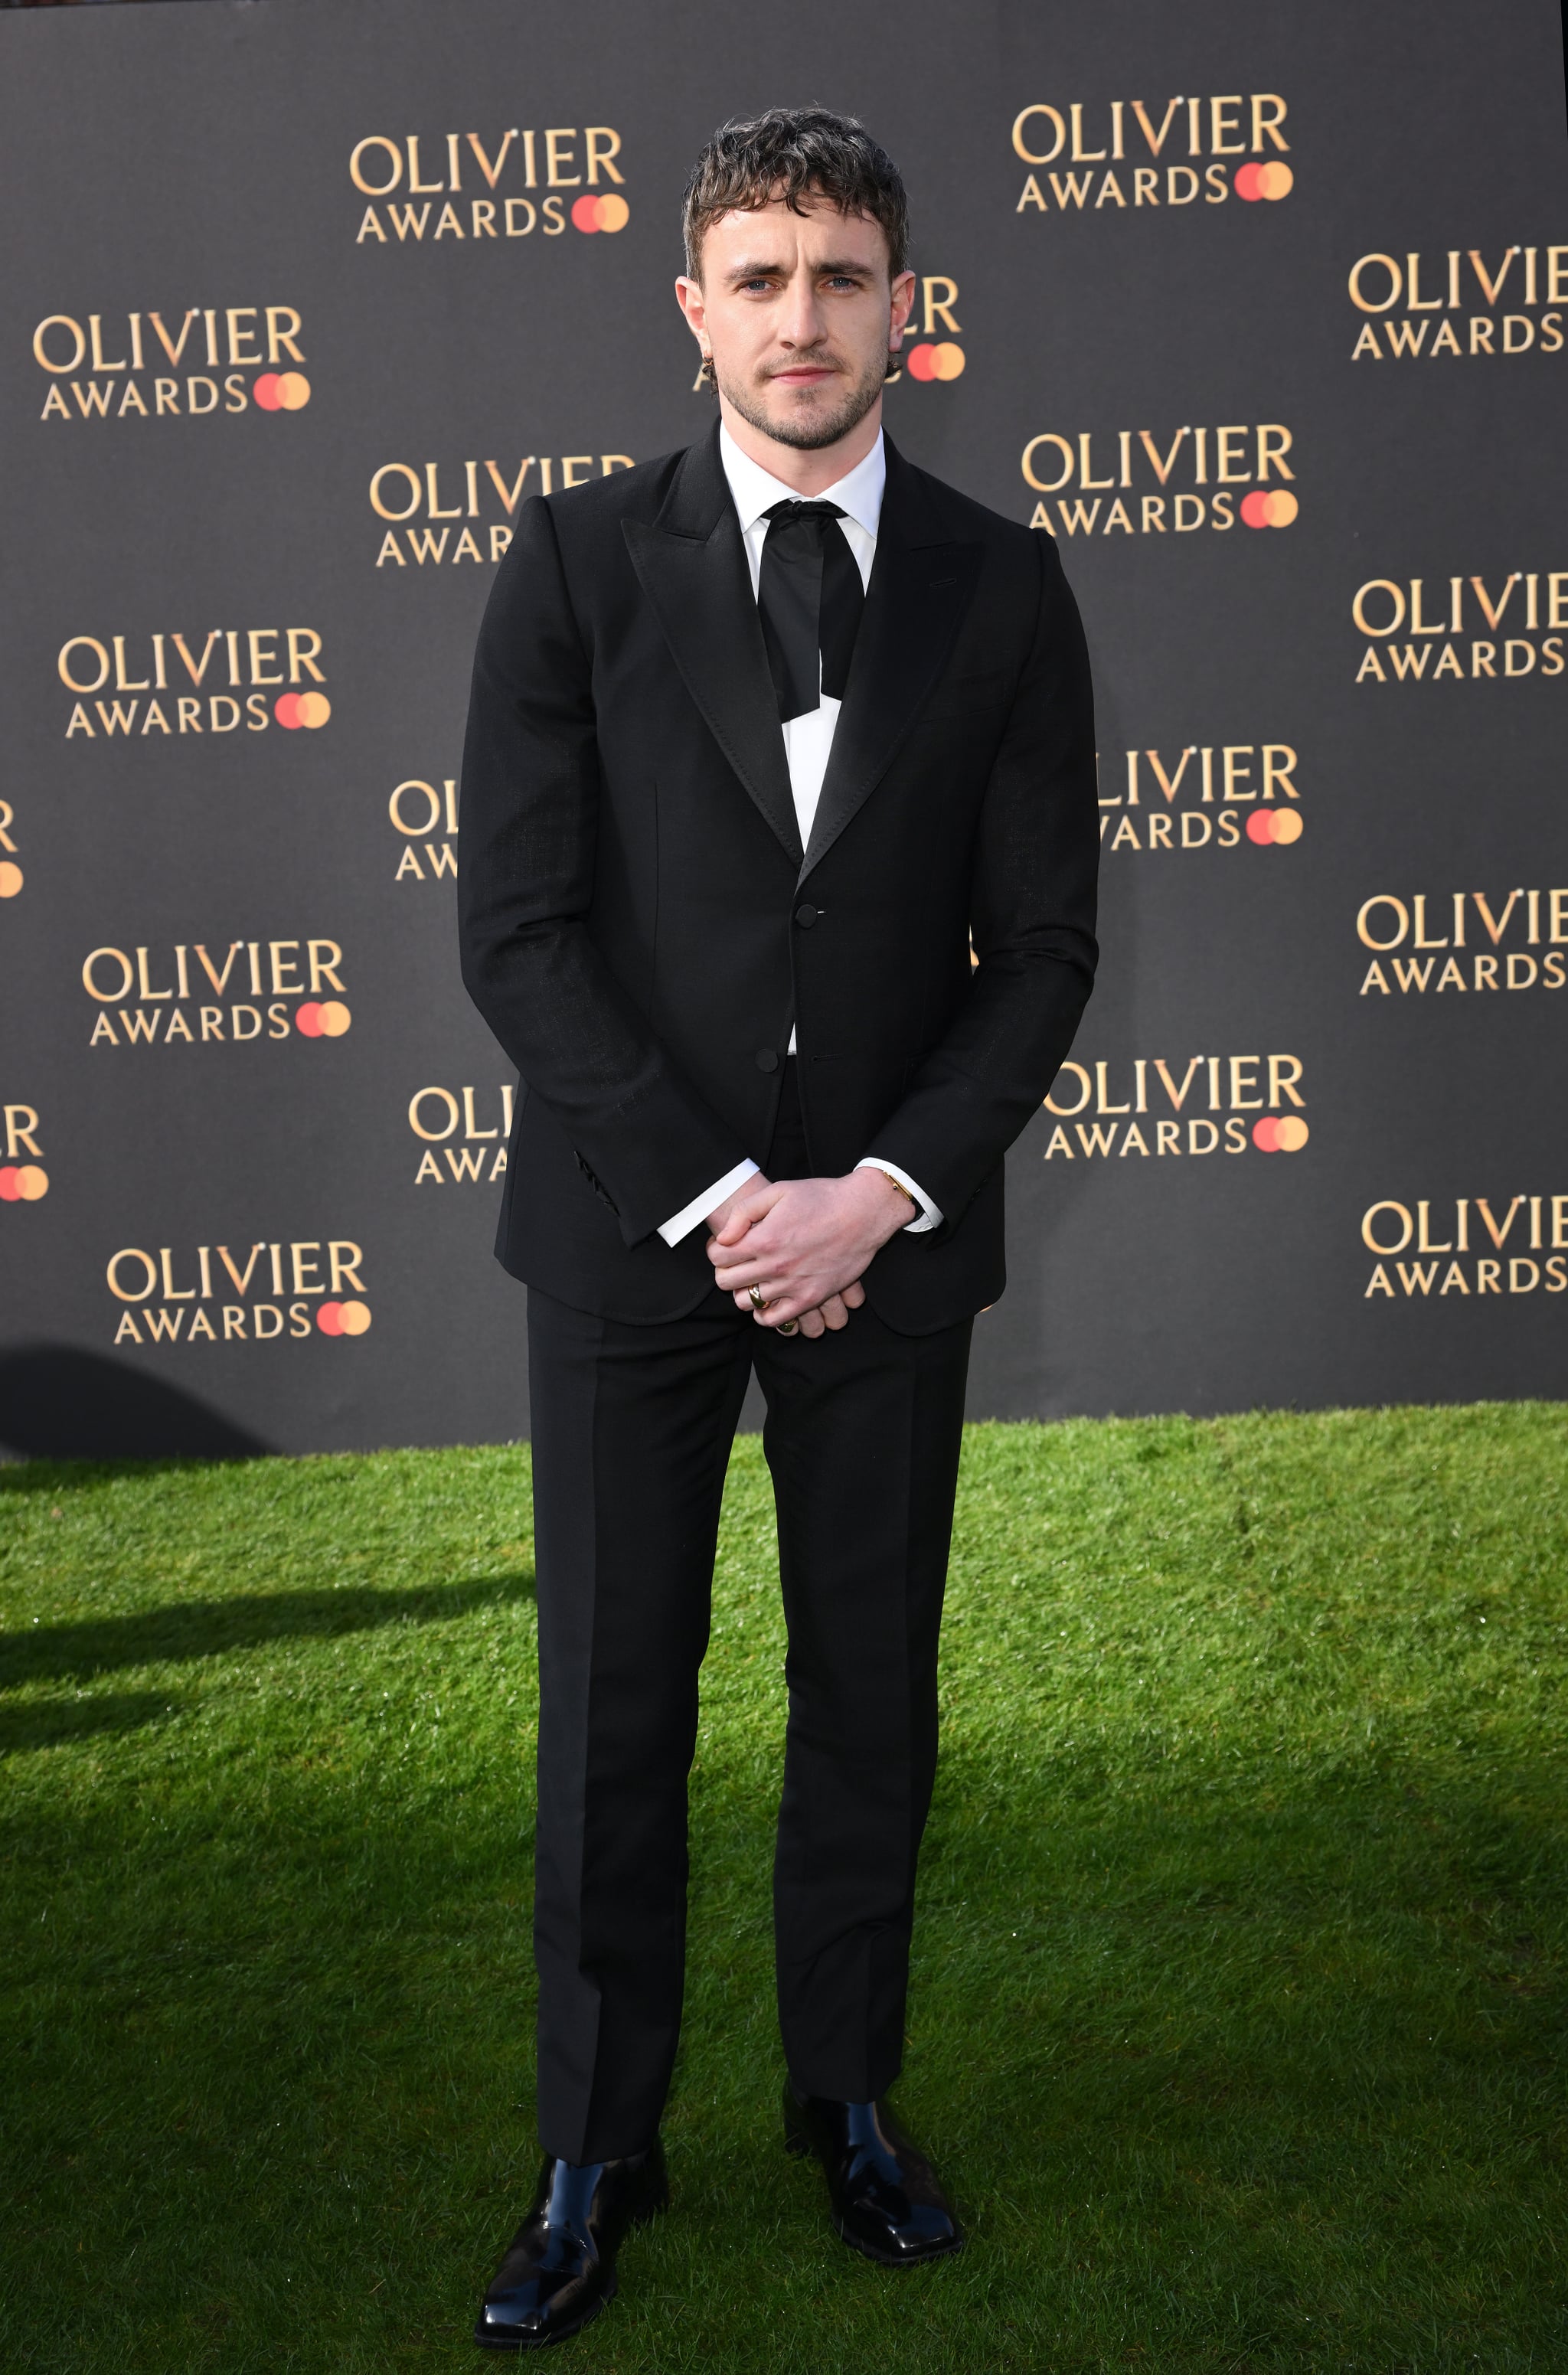 LONDON, ENGLAND - APRIL 02: Paul Mescal attends The Olivier Awards 2023 at the Royal Albert Hall on April 02, 2023 in London, England. (Photo by Karwai Tang/WireImage)